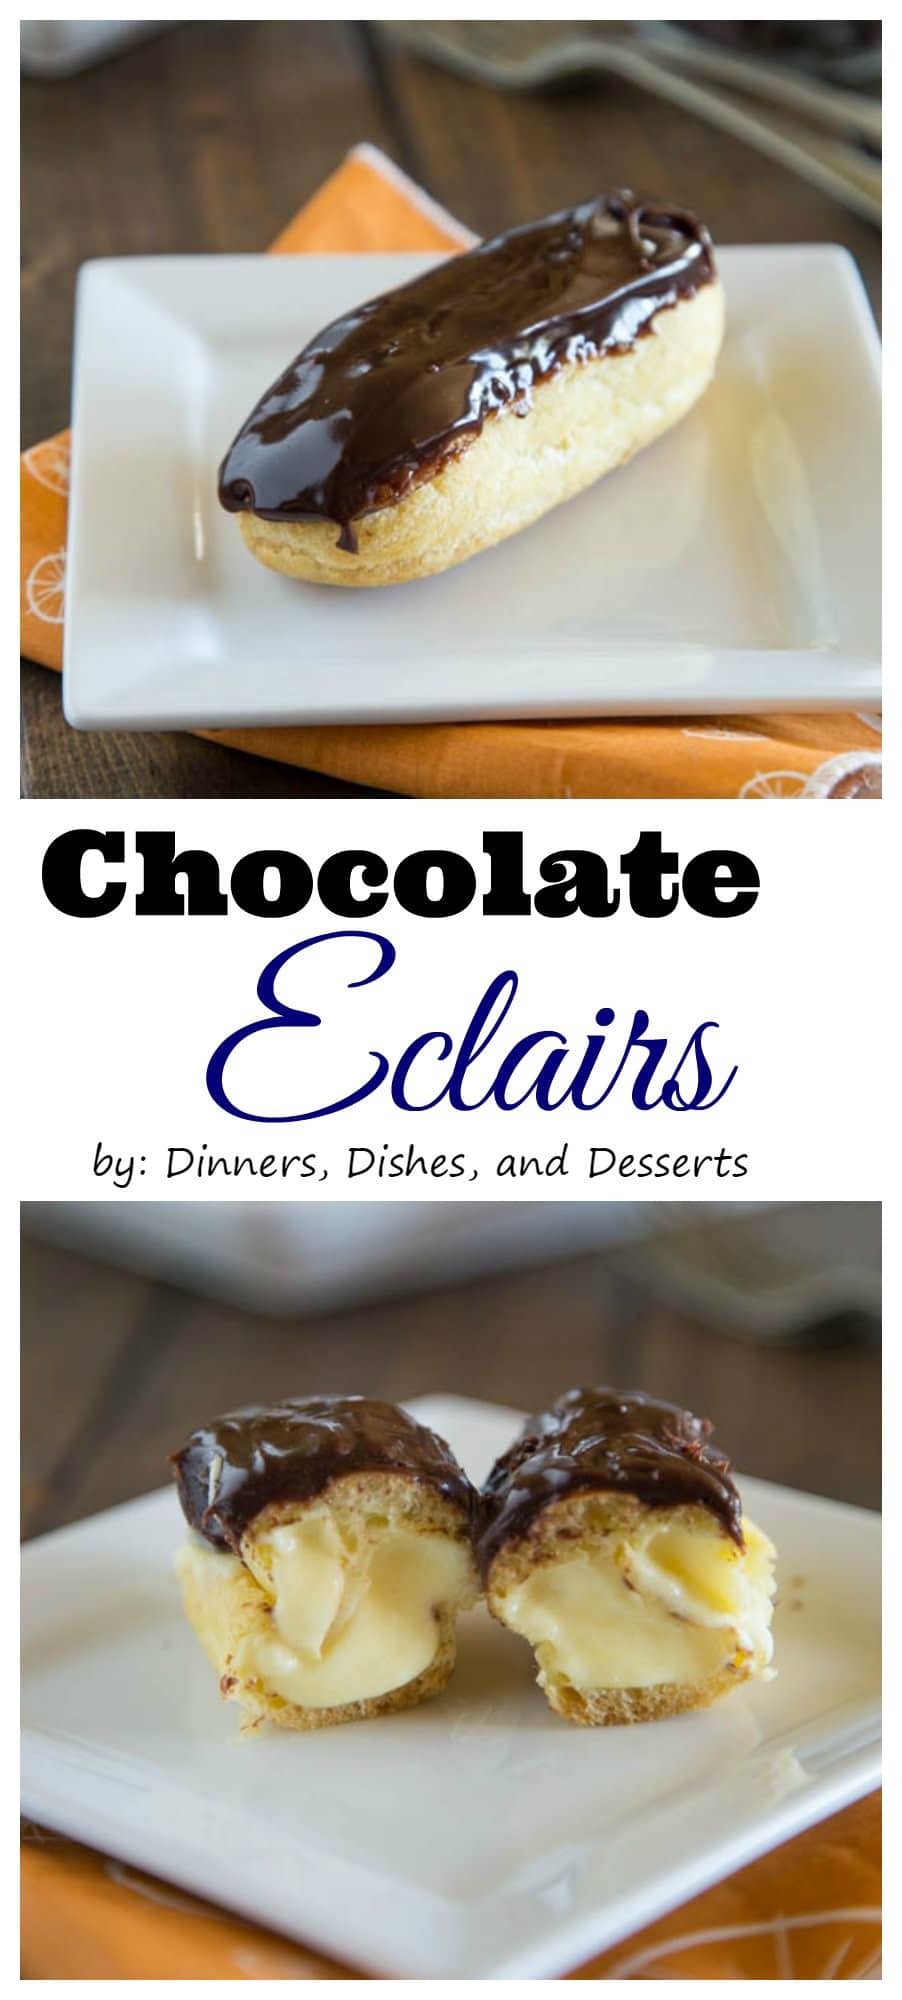 Chocolate Eclairs - Light and airy pastry filled with a vanilla cream, and then topped with a chocolate icing.  Sure to impress, but way easier than you think to make!